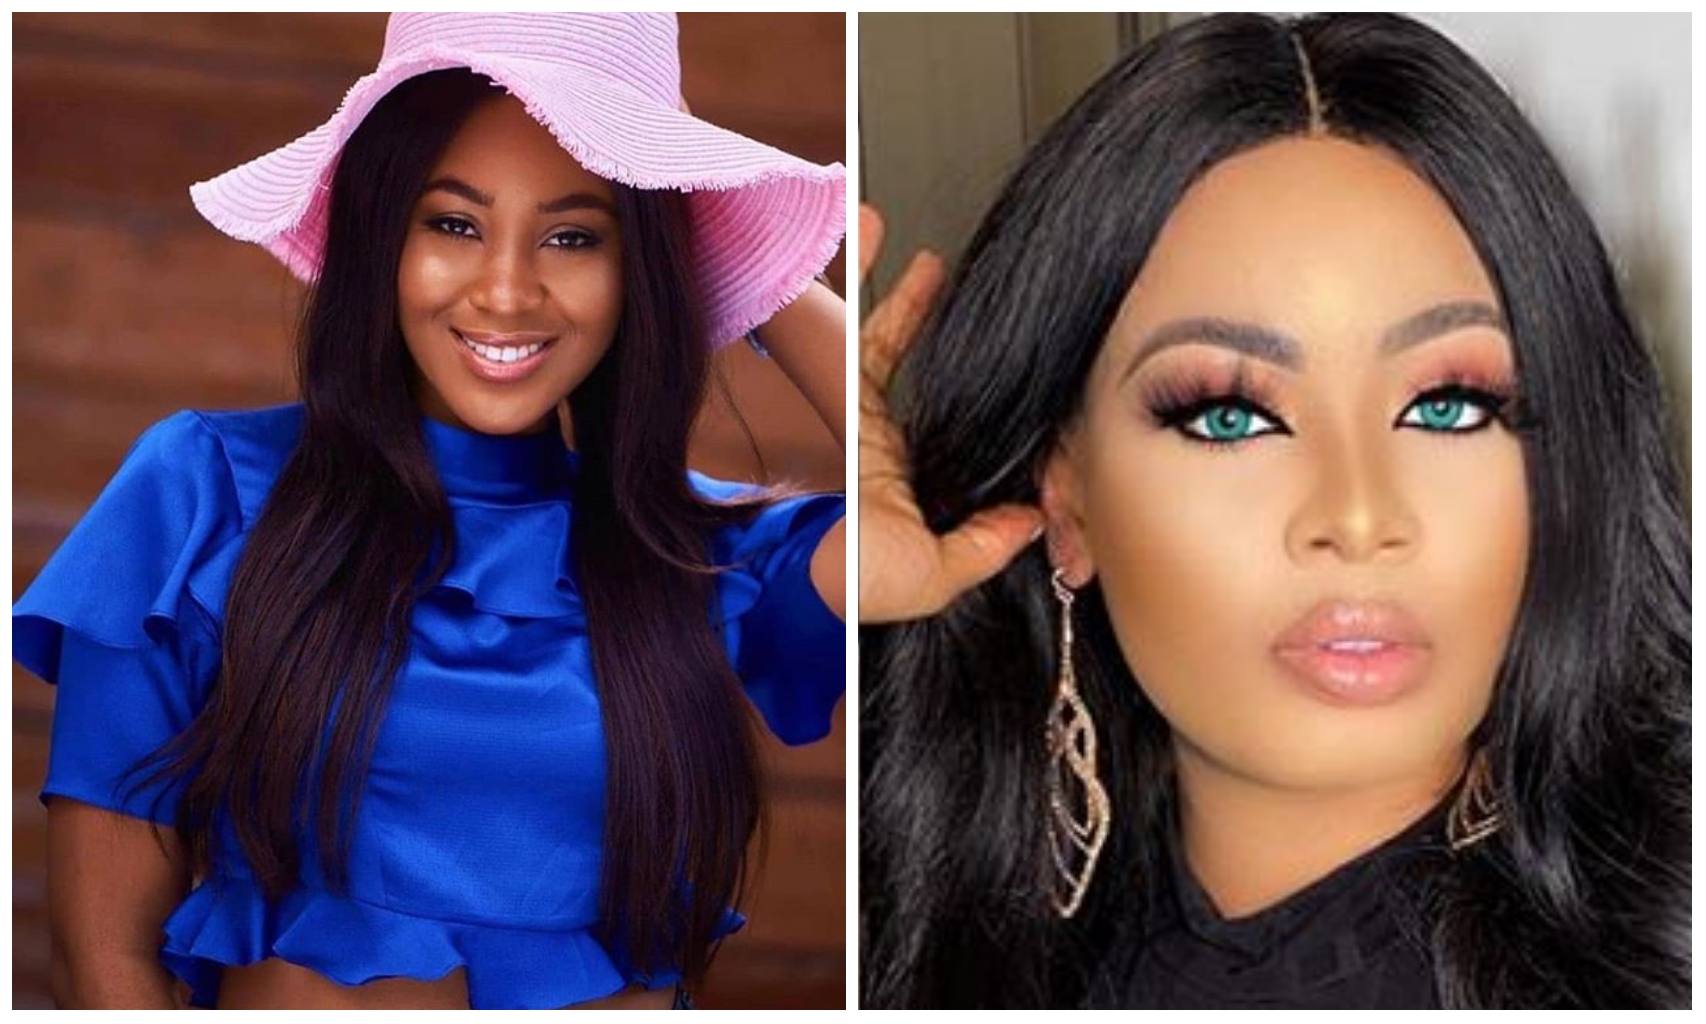 Nothing goes for nothing these days – BBNaija's Nina Ivy reacts to Erica audio promise